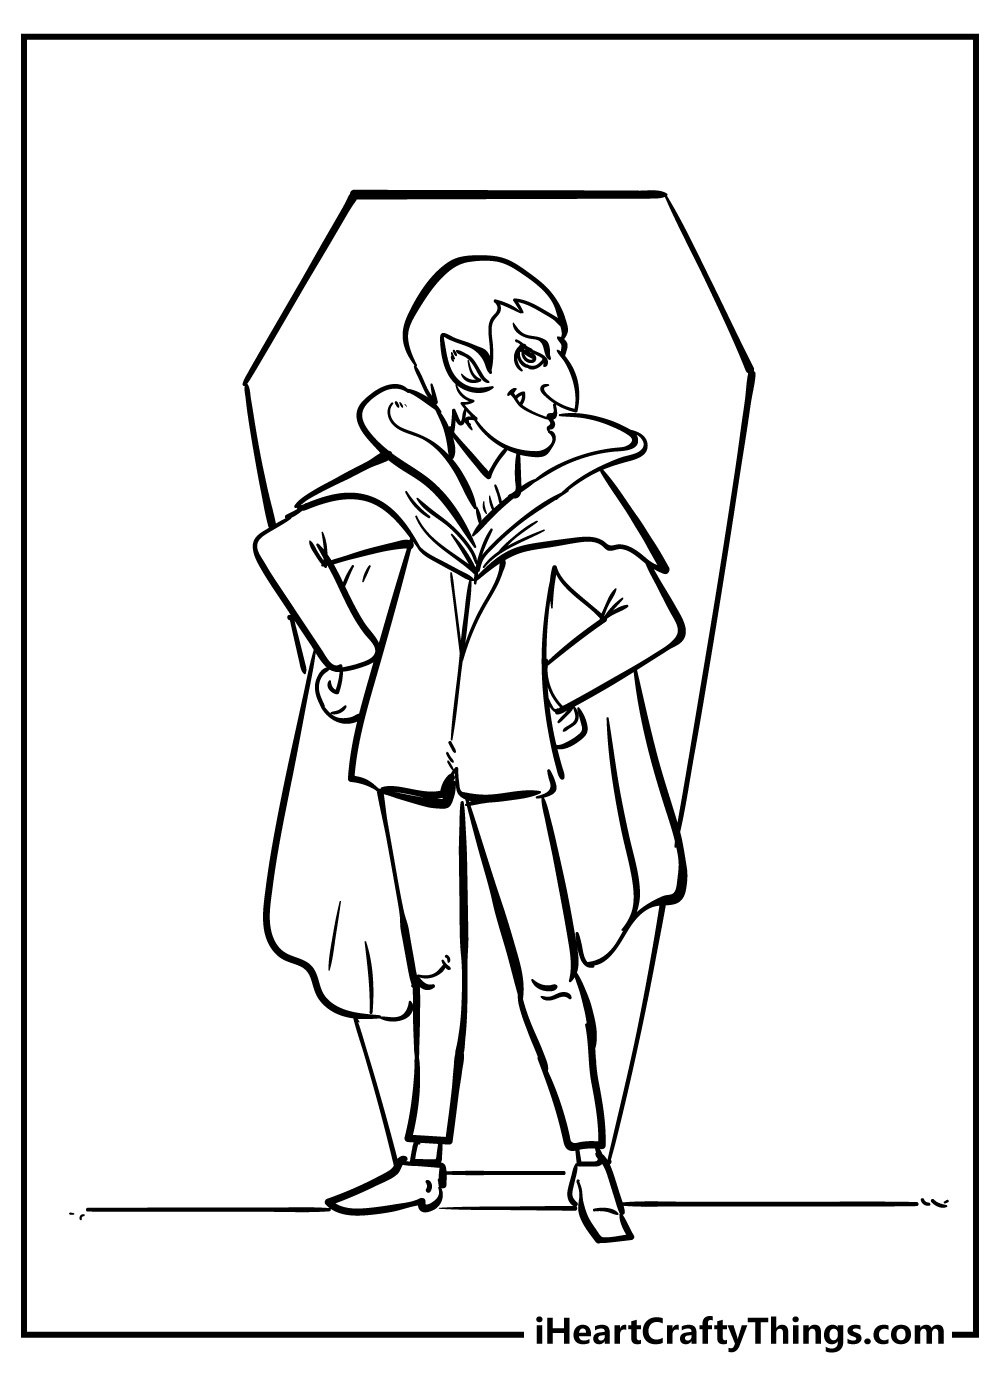 Vampire Coloring Sheet for children free download